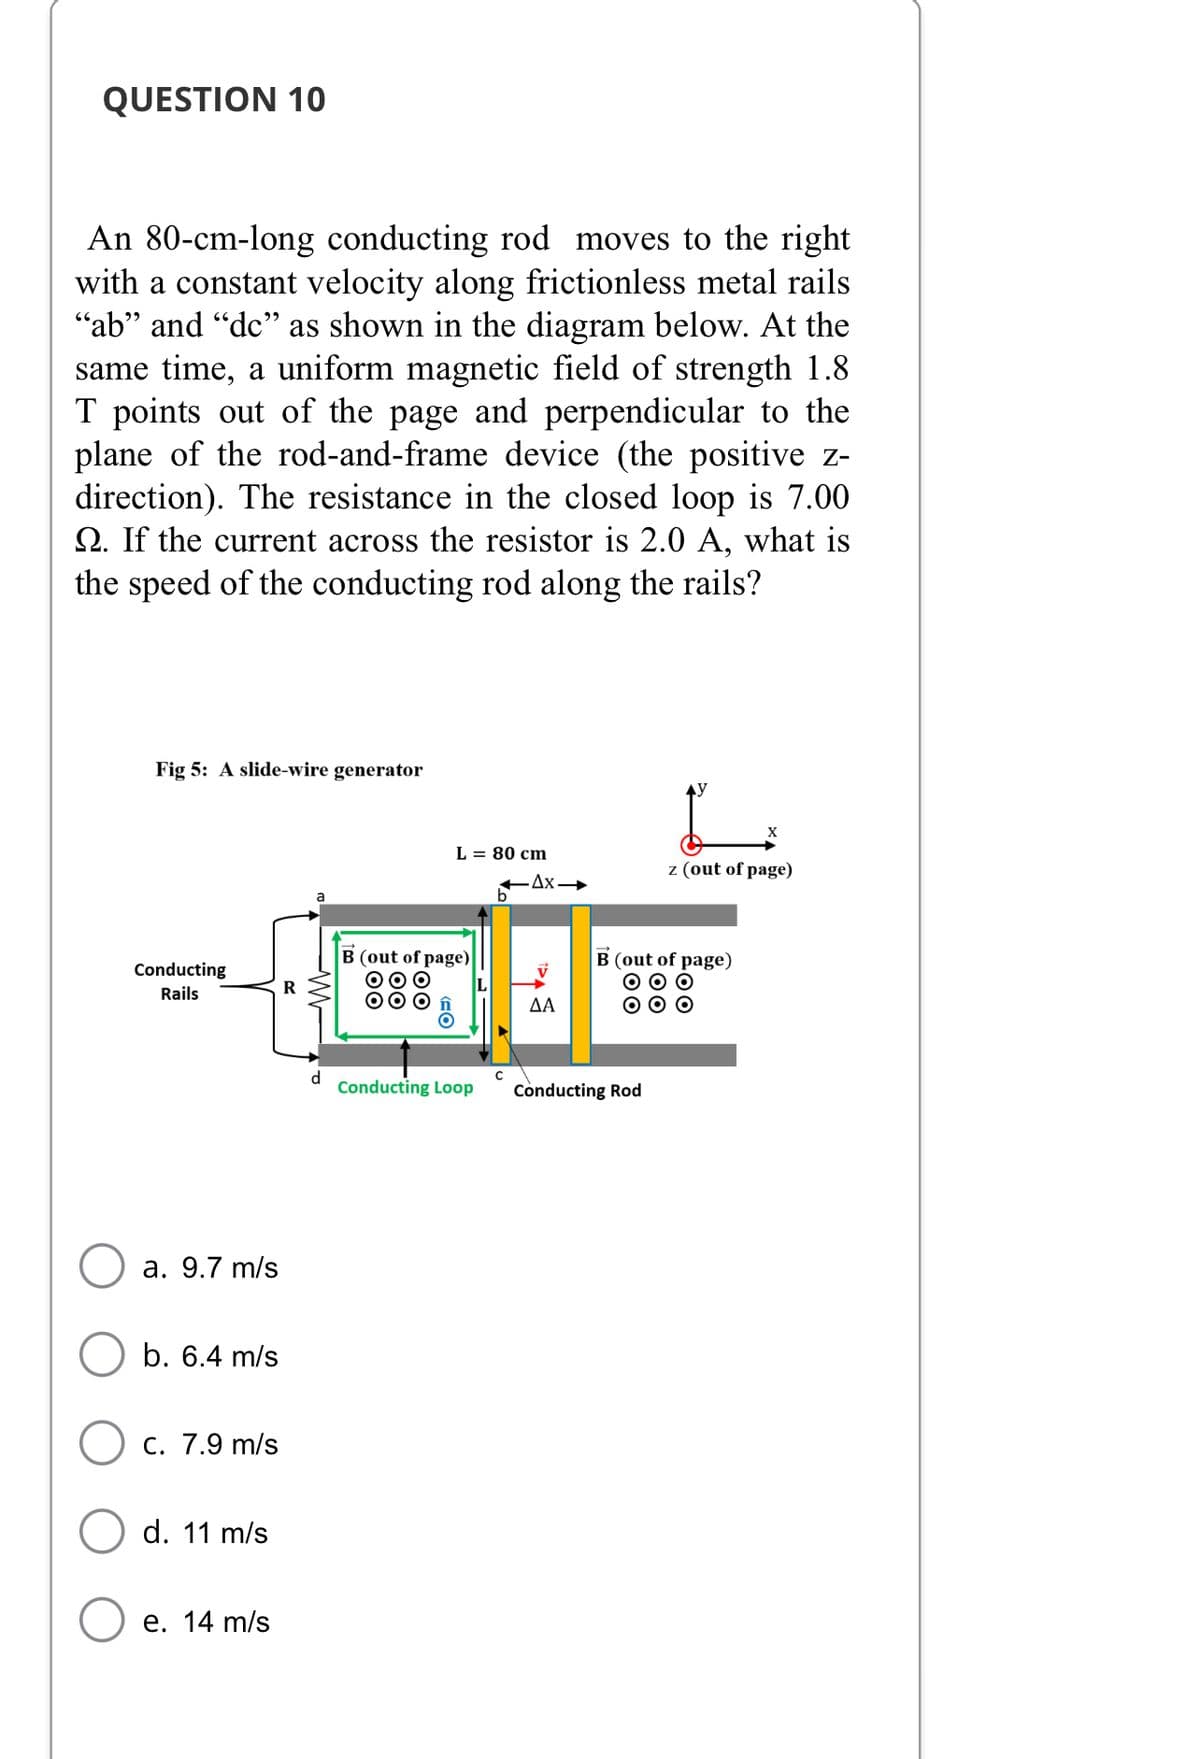 QUESTION 10
An 80-cm-long conducting rod moves to the right
with a constant velocity along frictionless metal rails
"ab" and "de" as shown in the diagram below. At the
same time, a uniform magnetic field of strength 1.8
T points out of the page and perpendicular to the
plane of the rod-and-frame device (the positive z-
direction). The resistance in the closed loop is 7.00
Q. If the current across the resistor is 2.0 A, what is
the speed of the conducting rod along the rails?
Fig 5: A slide-wire generator
X
L = 80 cm
z (out of page)
Conducting
Rails
a. 9.7 m/s
b. 6.4 m/s
c. 7.9 m/s
d. 11 m/s
e. 14 m/s
R
d
B (out of page)
OO
OF>
Conducting Loop
C
.Ax-
B (out of page)
000
000
ΔΑ
Conducting Rod